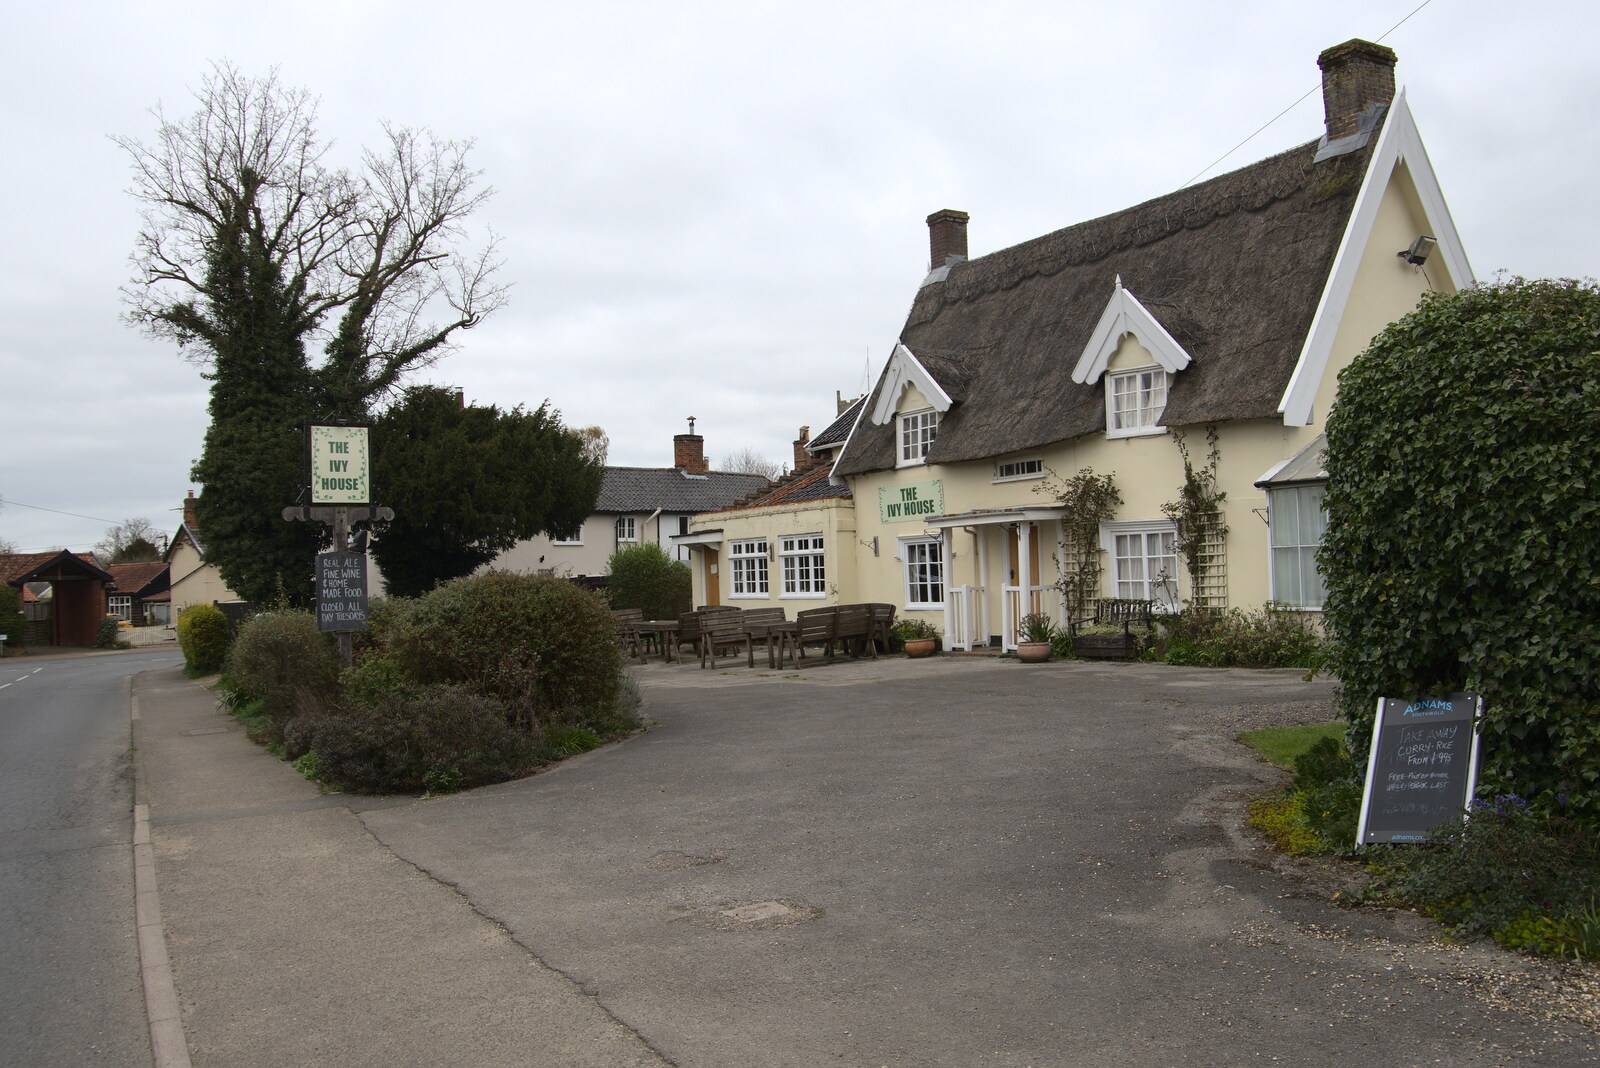 The Ivy House in Stradbroke, up for sale as a house from A Trip to Dunwich Beach, Dunwich, Suffolk - 2nd April 2021